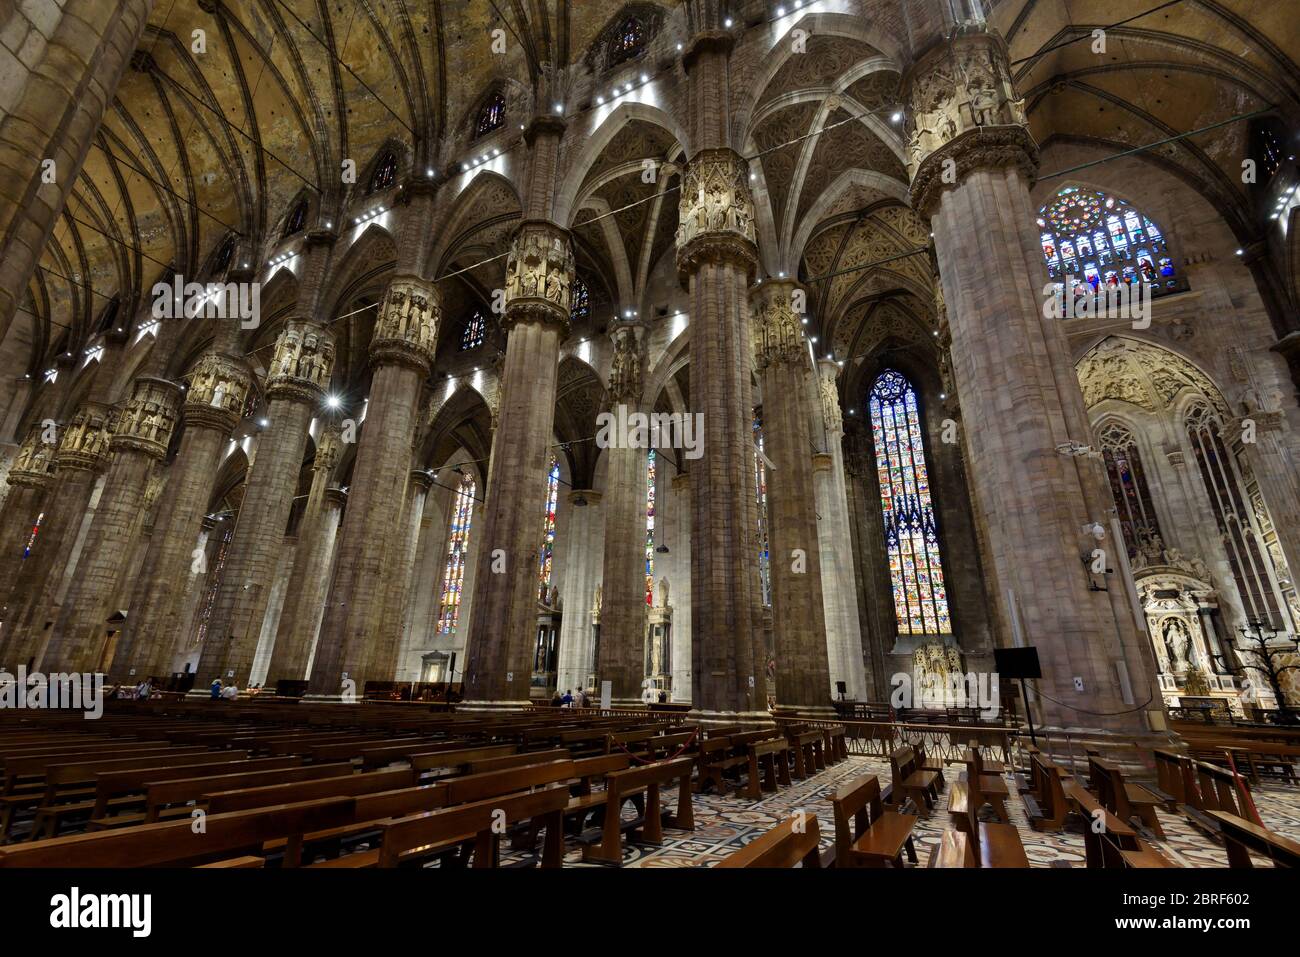 Milan, Italy - May 16, 2017: Interior of the Milan Cathedral (Duomo di Milano). Milan Duomo is the largest church in Italy and the fifth largest in th Stock Photo